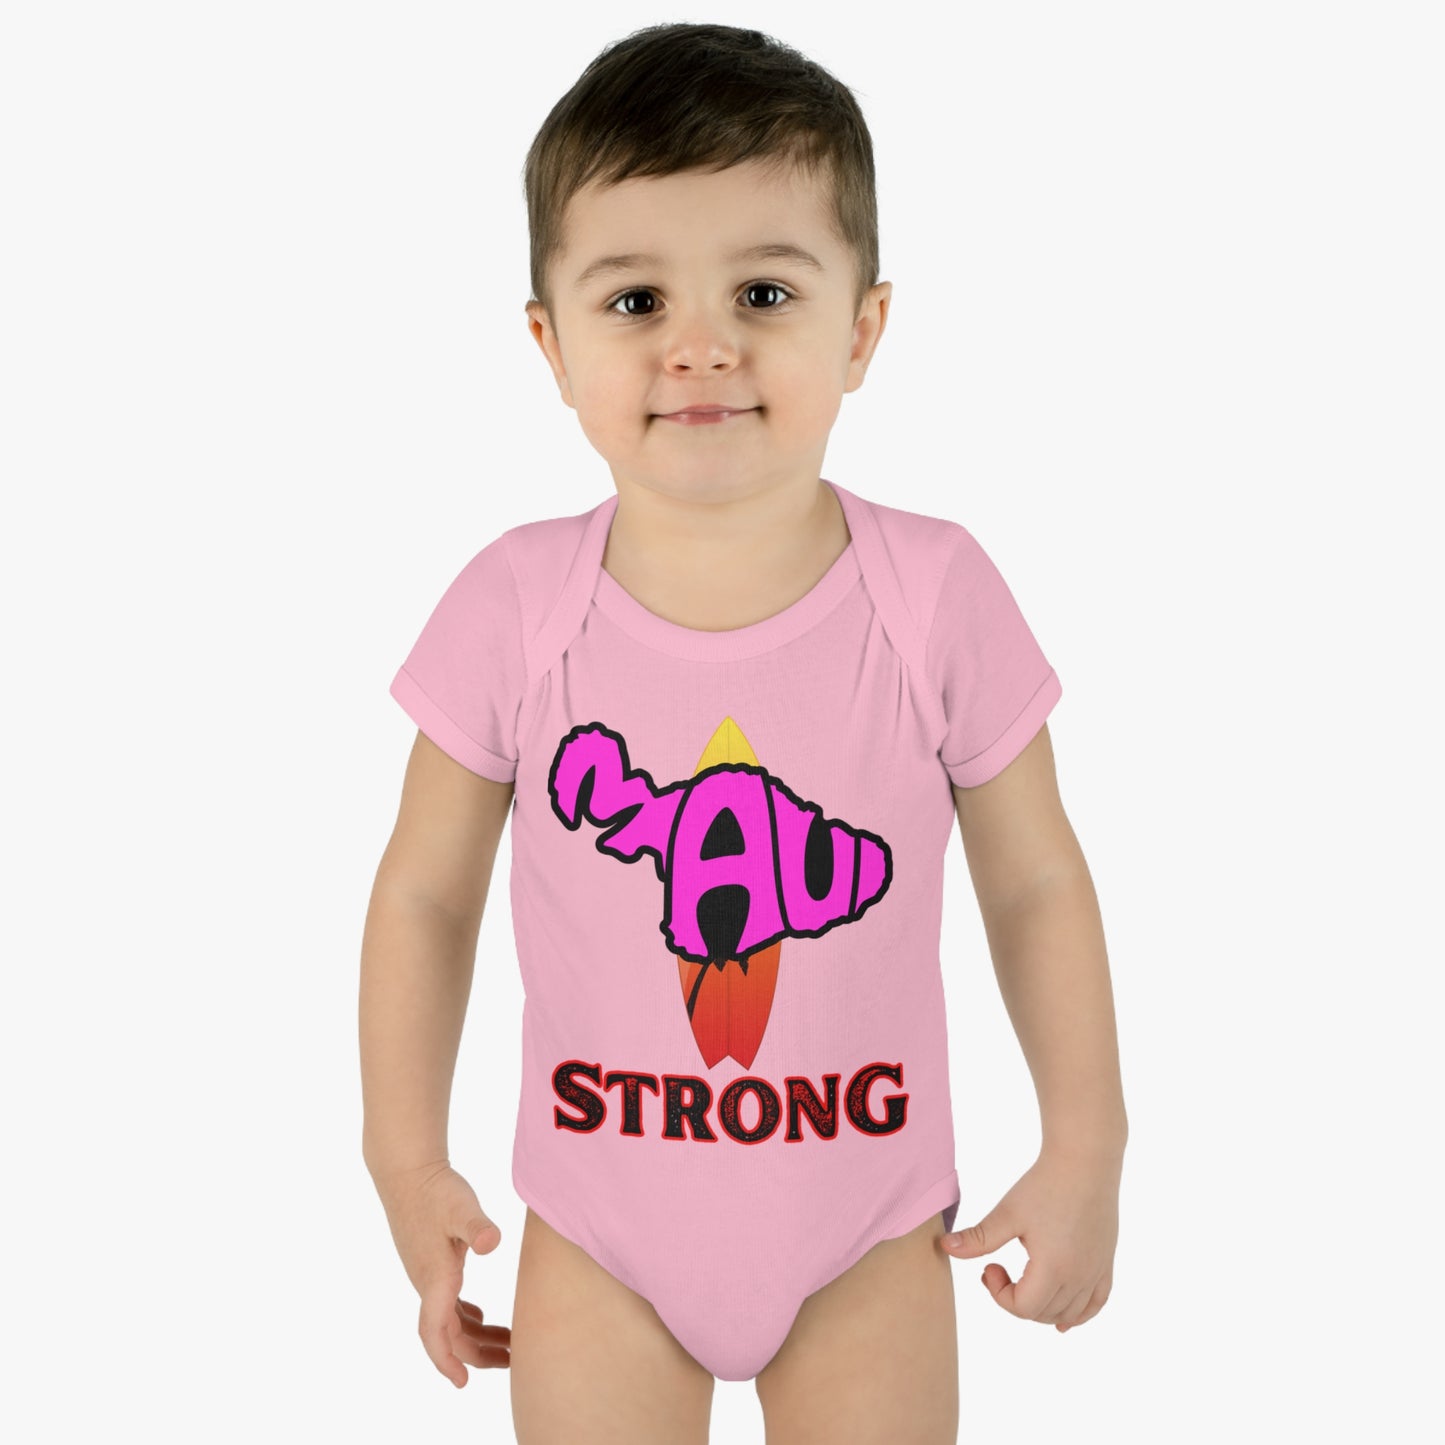 Maui Strong graphic Infant Baby Rib Bodysuit